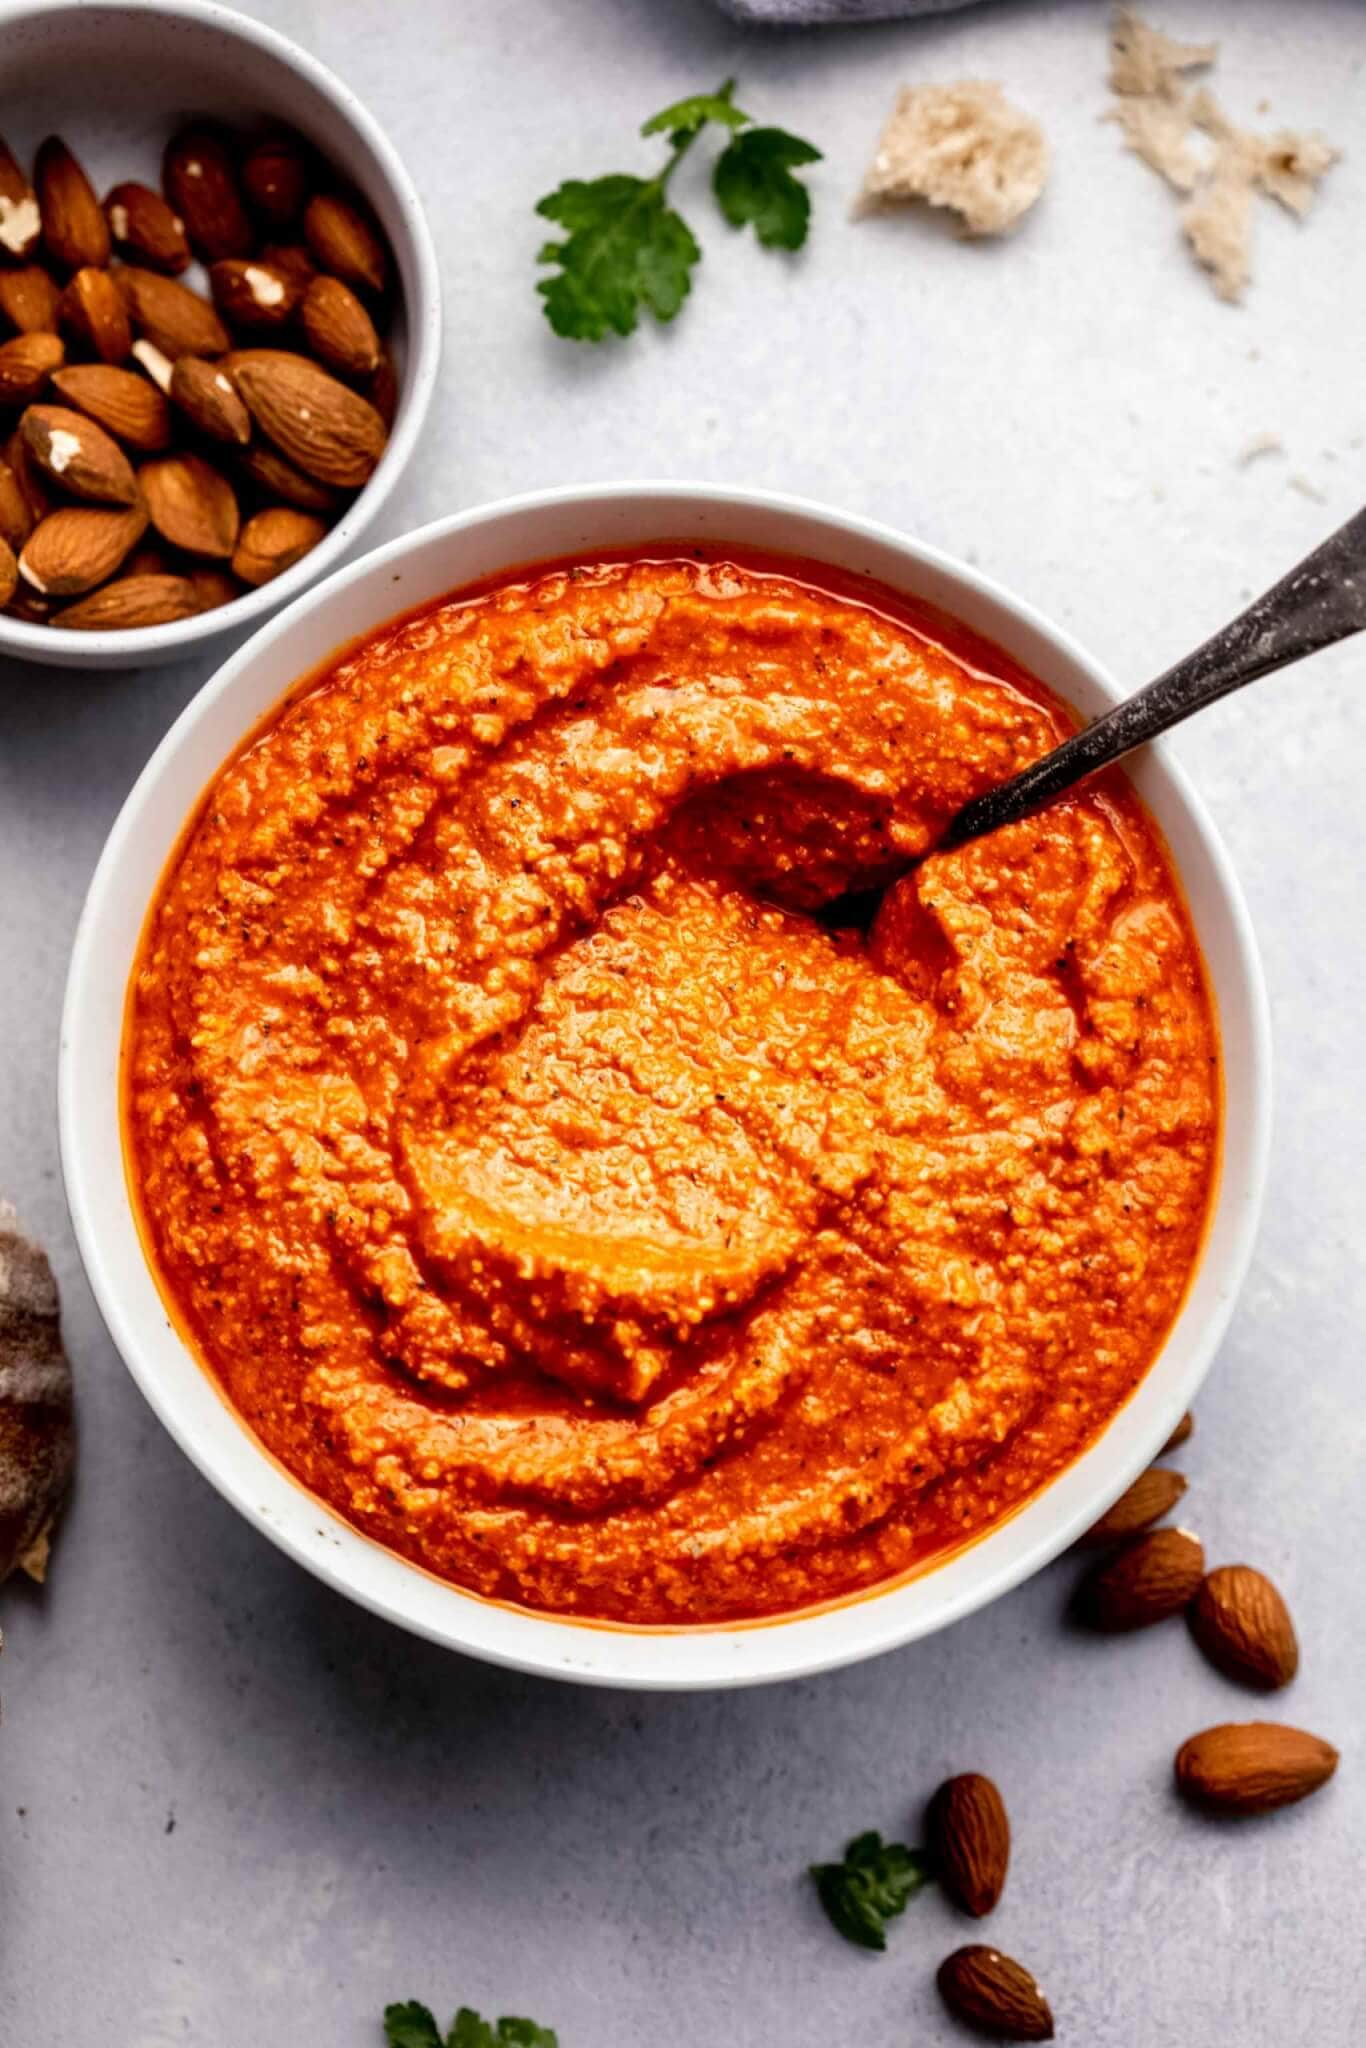 Romesco sauce in white bowl next to almonds and crusty bread.